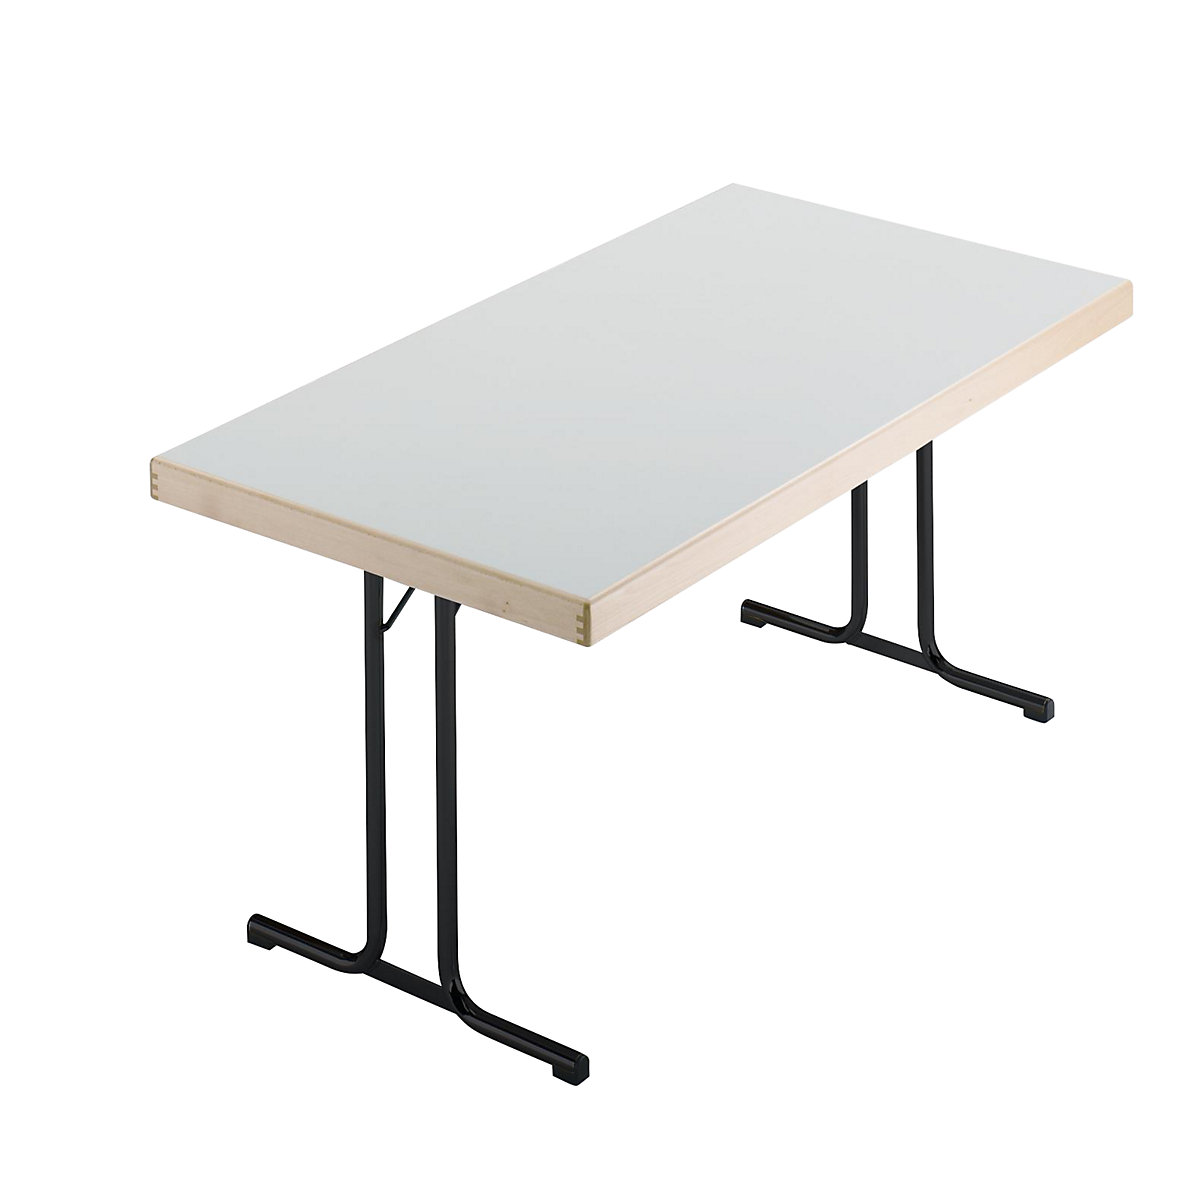 Folding table, double T-foot stand, 1200x800 mm, anthracite frame, light grey panel-10